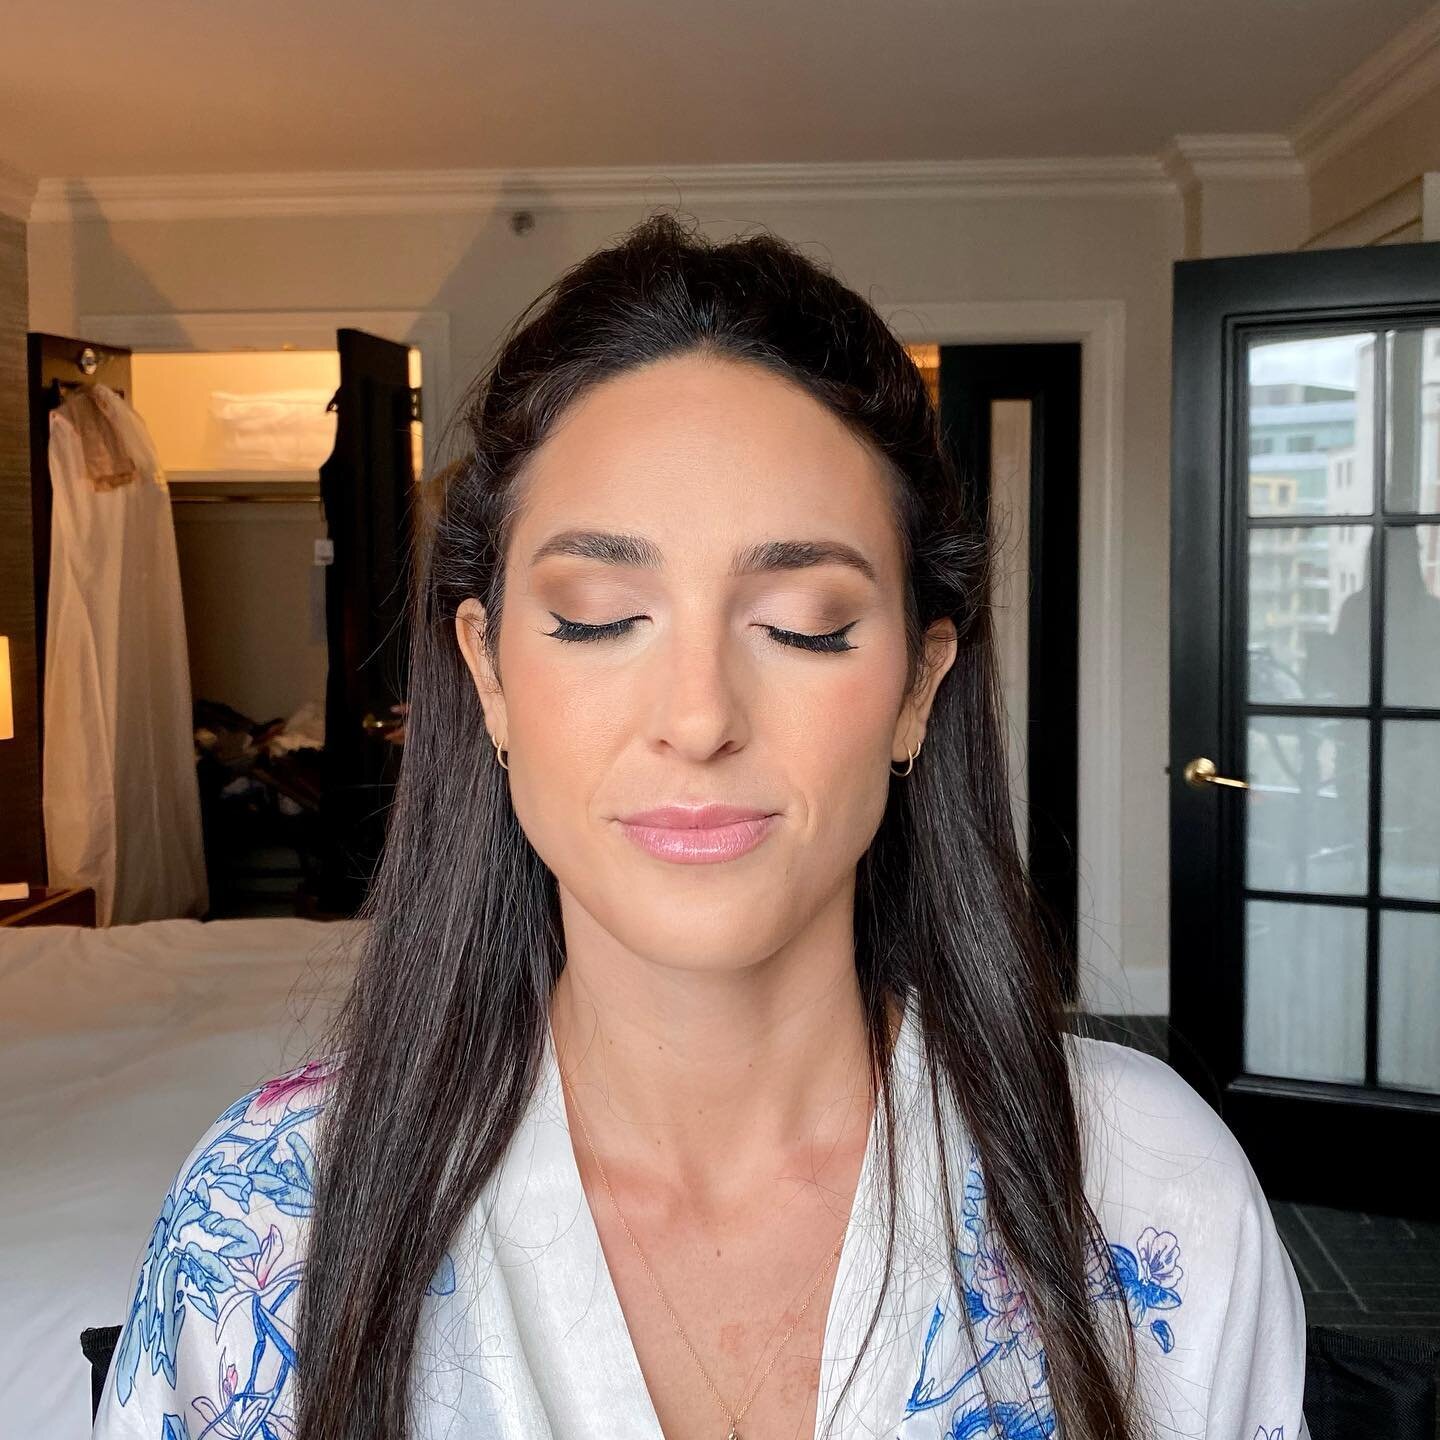 Matte eyes and a winged liner, one of my absolute favorite looks especially for a ✨timeless✨ MOH look! Swipe for the final look once hair was done and lipstick was applied. No filters or edits- just a lighting change (and portrait mode) since it was 